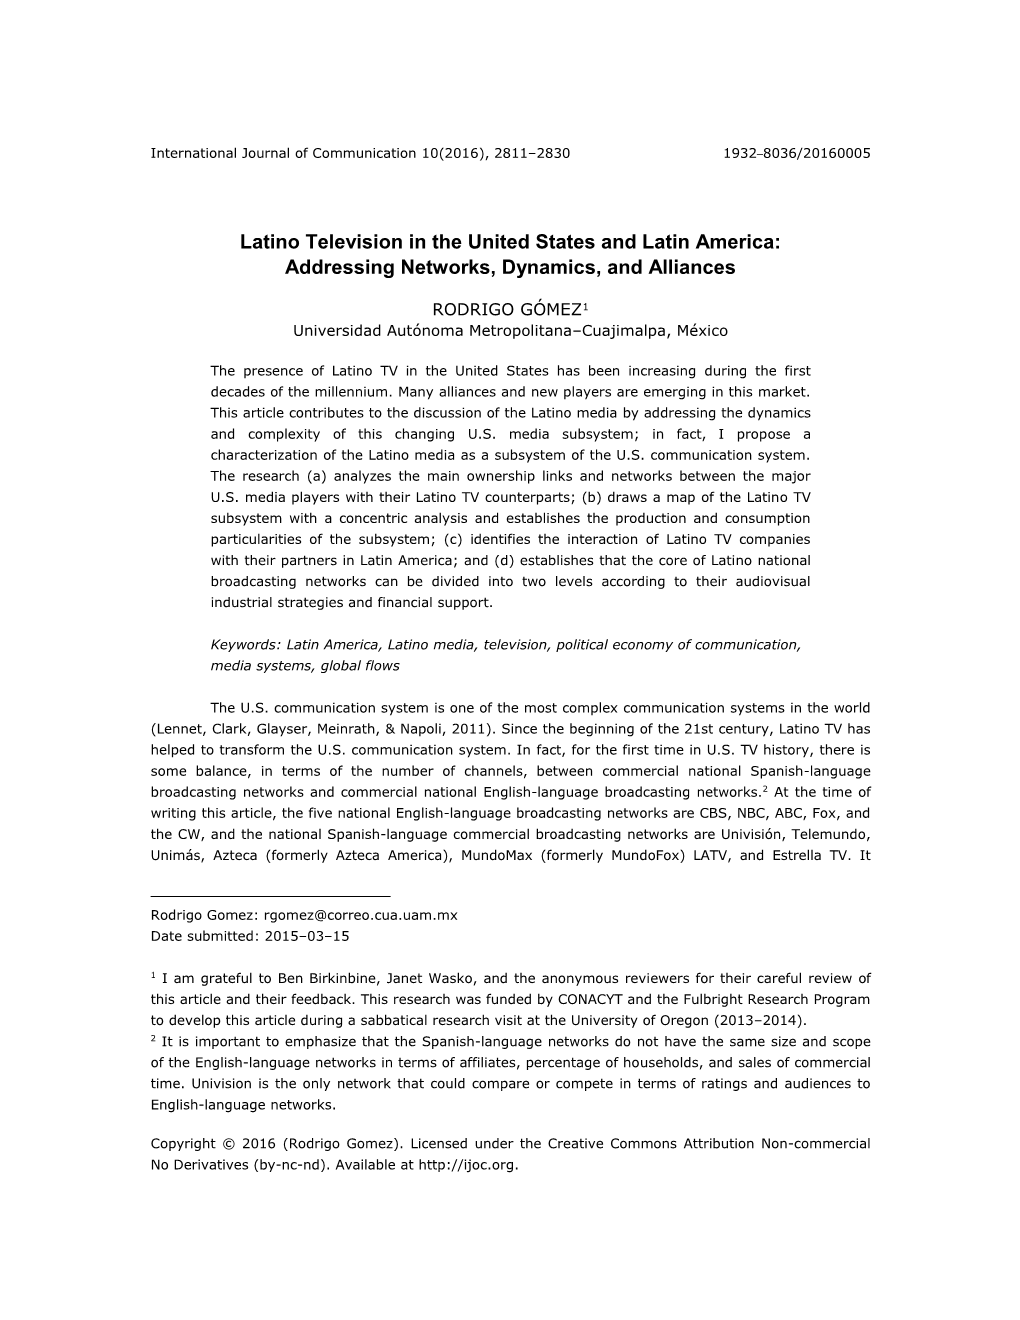 Latino Television in the United States and Latin America: Addressing Networks, Dynamics, and Alliances